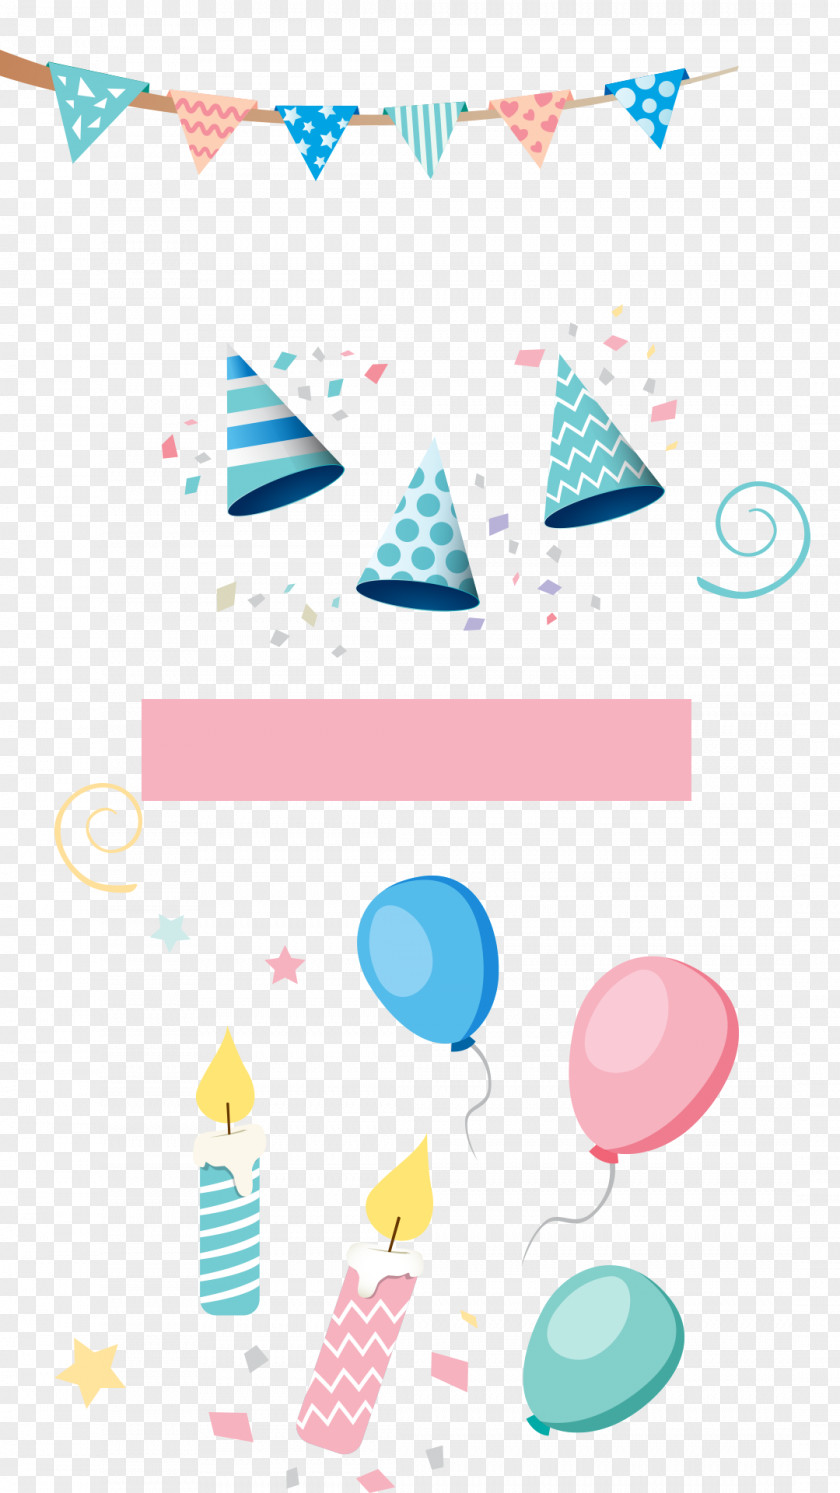 Hat Balloon Candle Birthday Cake PNG